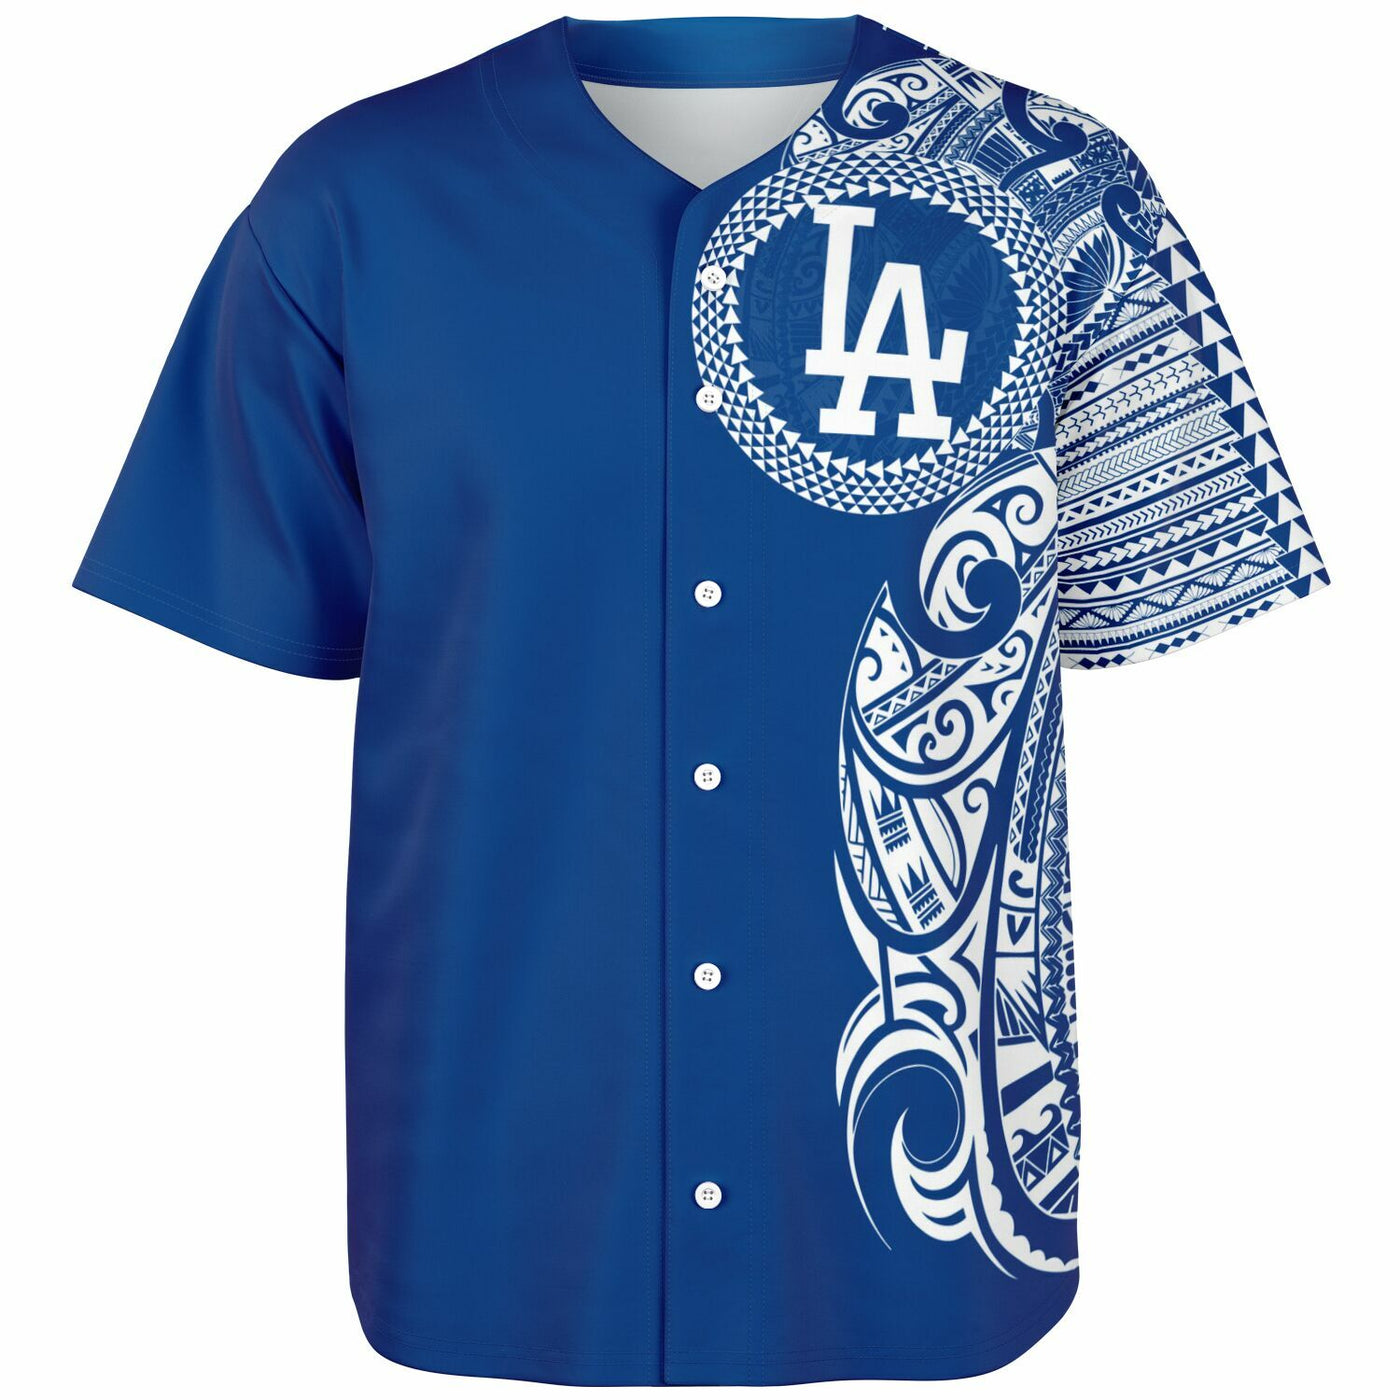 Los Angeles Dodgers Jersey Mens XL White Red Blue Filipino